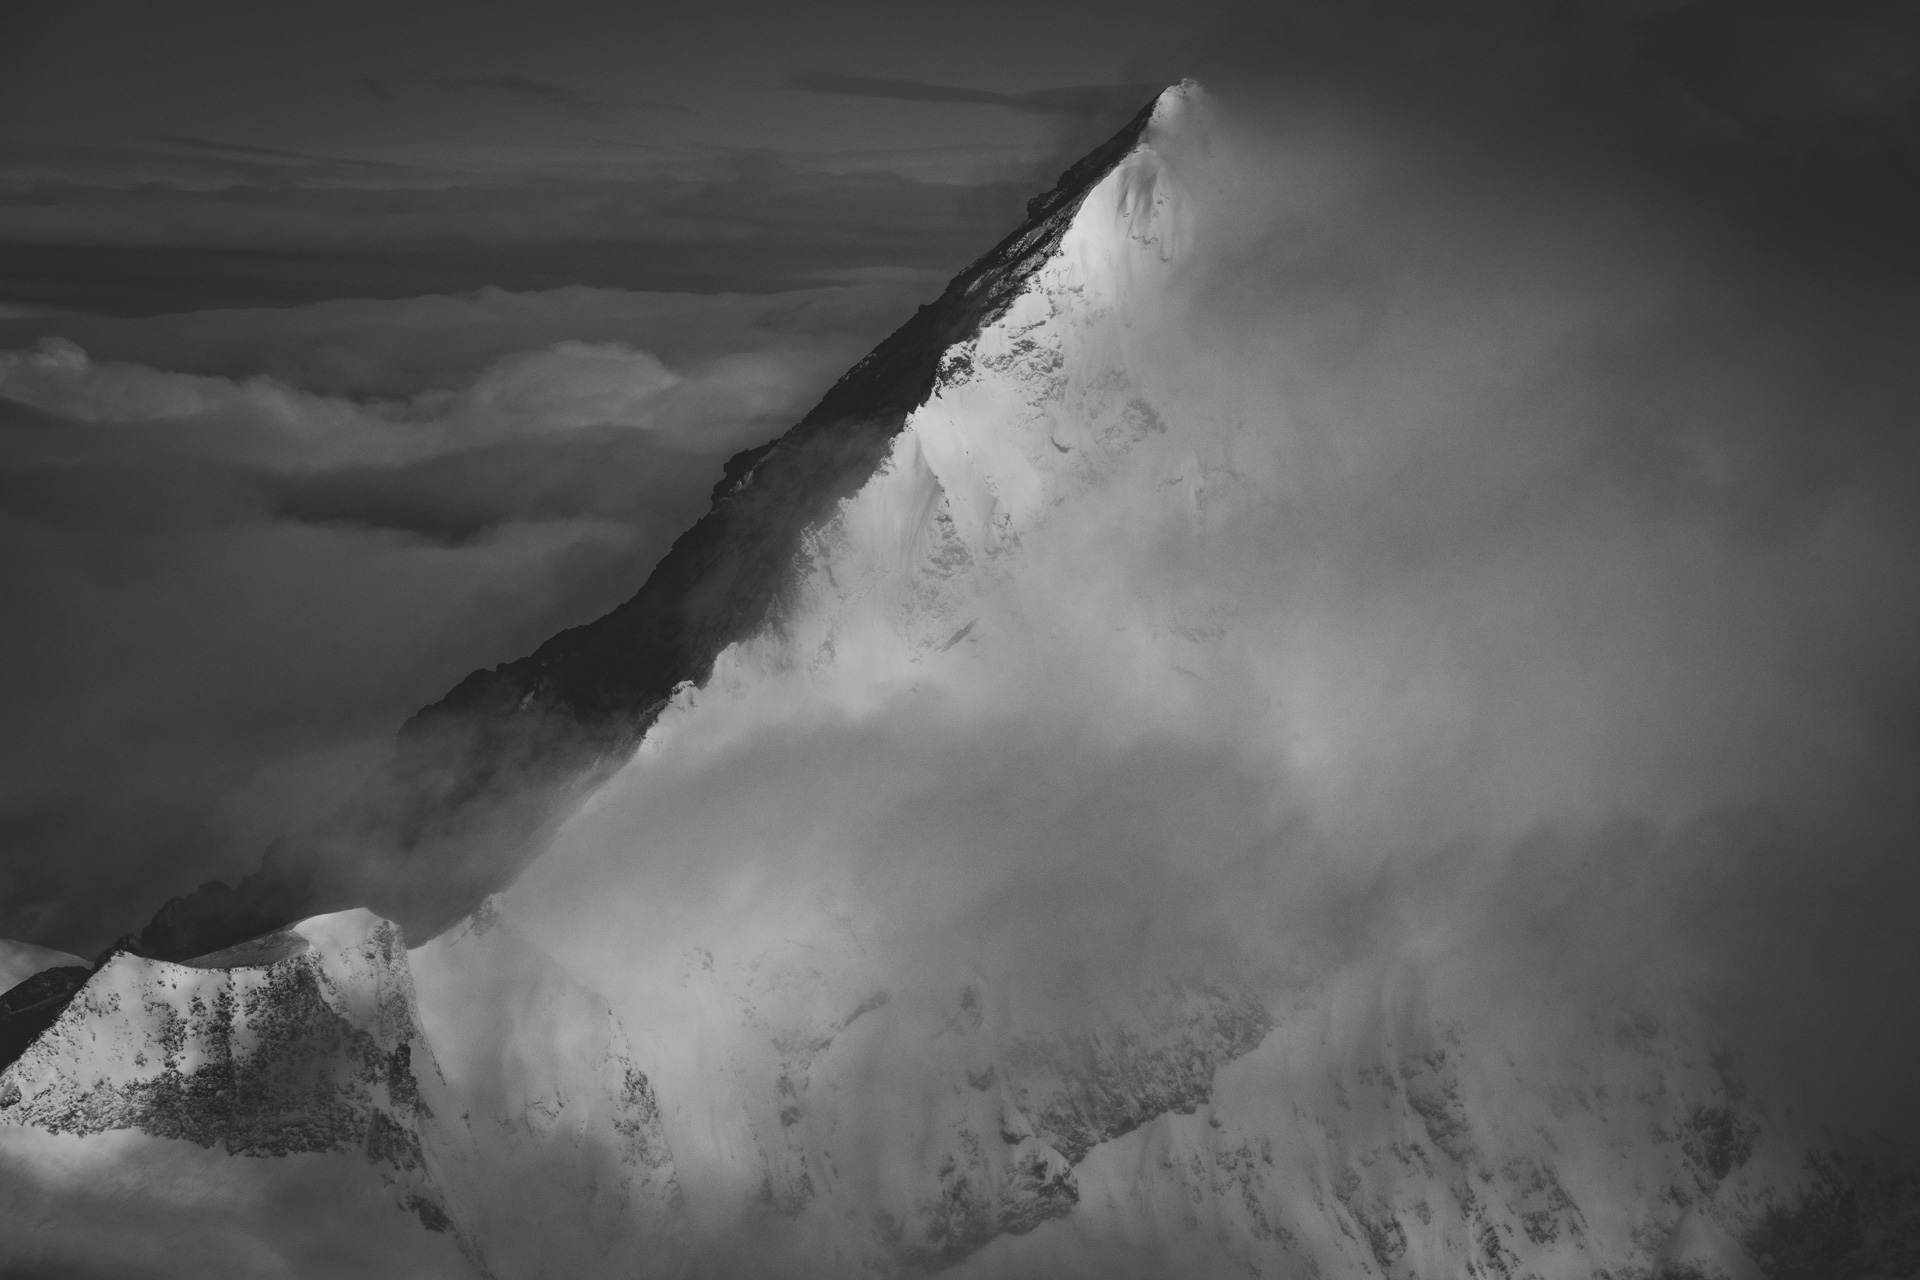 Black and white mountain landscape pictures i nthe swiss alps- The Dent Blanche